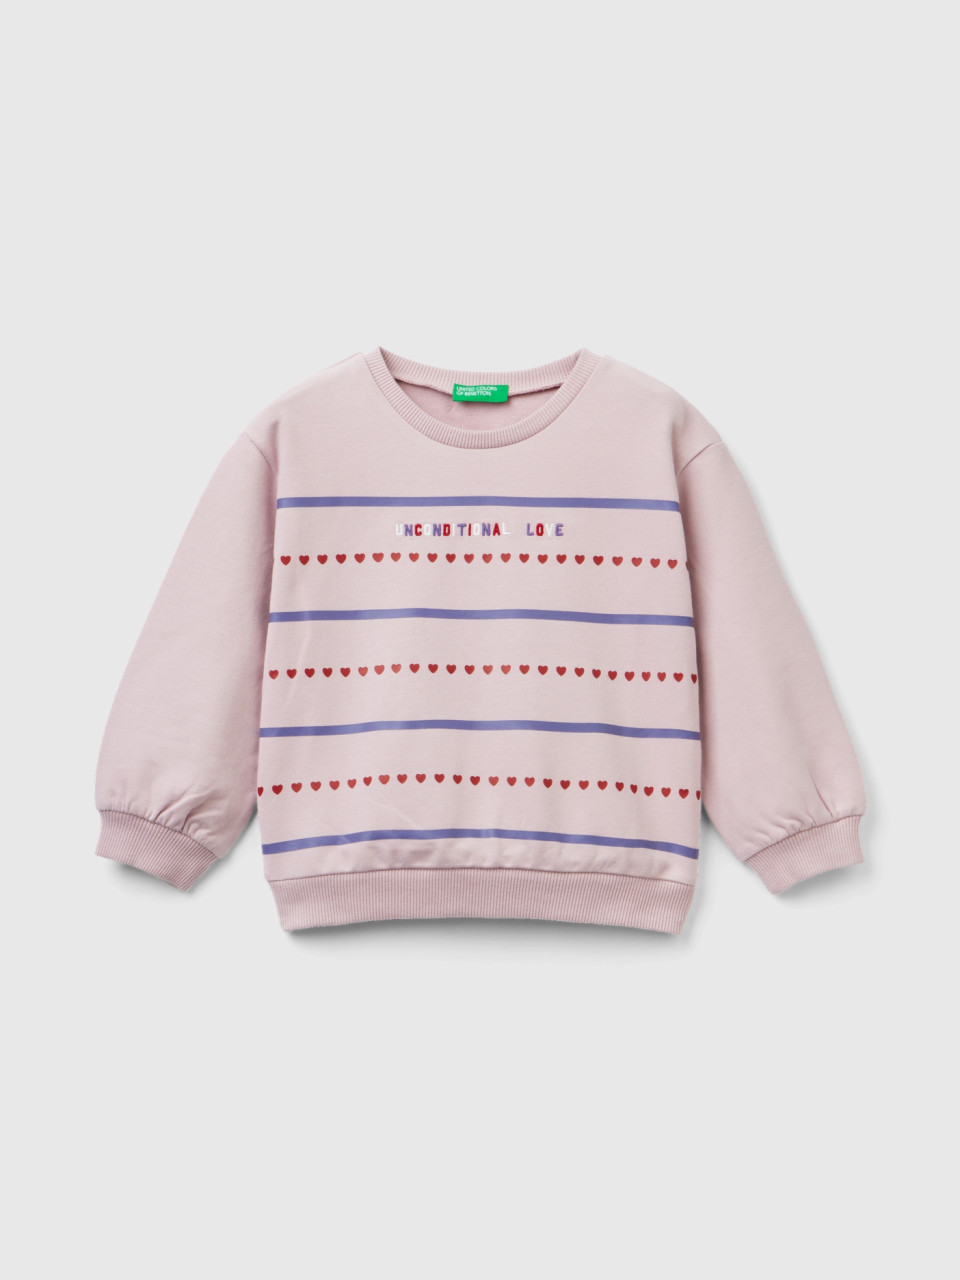 Benetton, Sweatshirt With Print And Embroidery, Pink, Kids